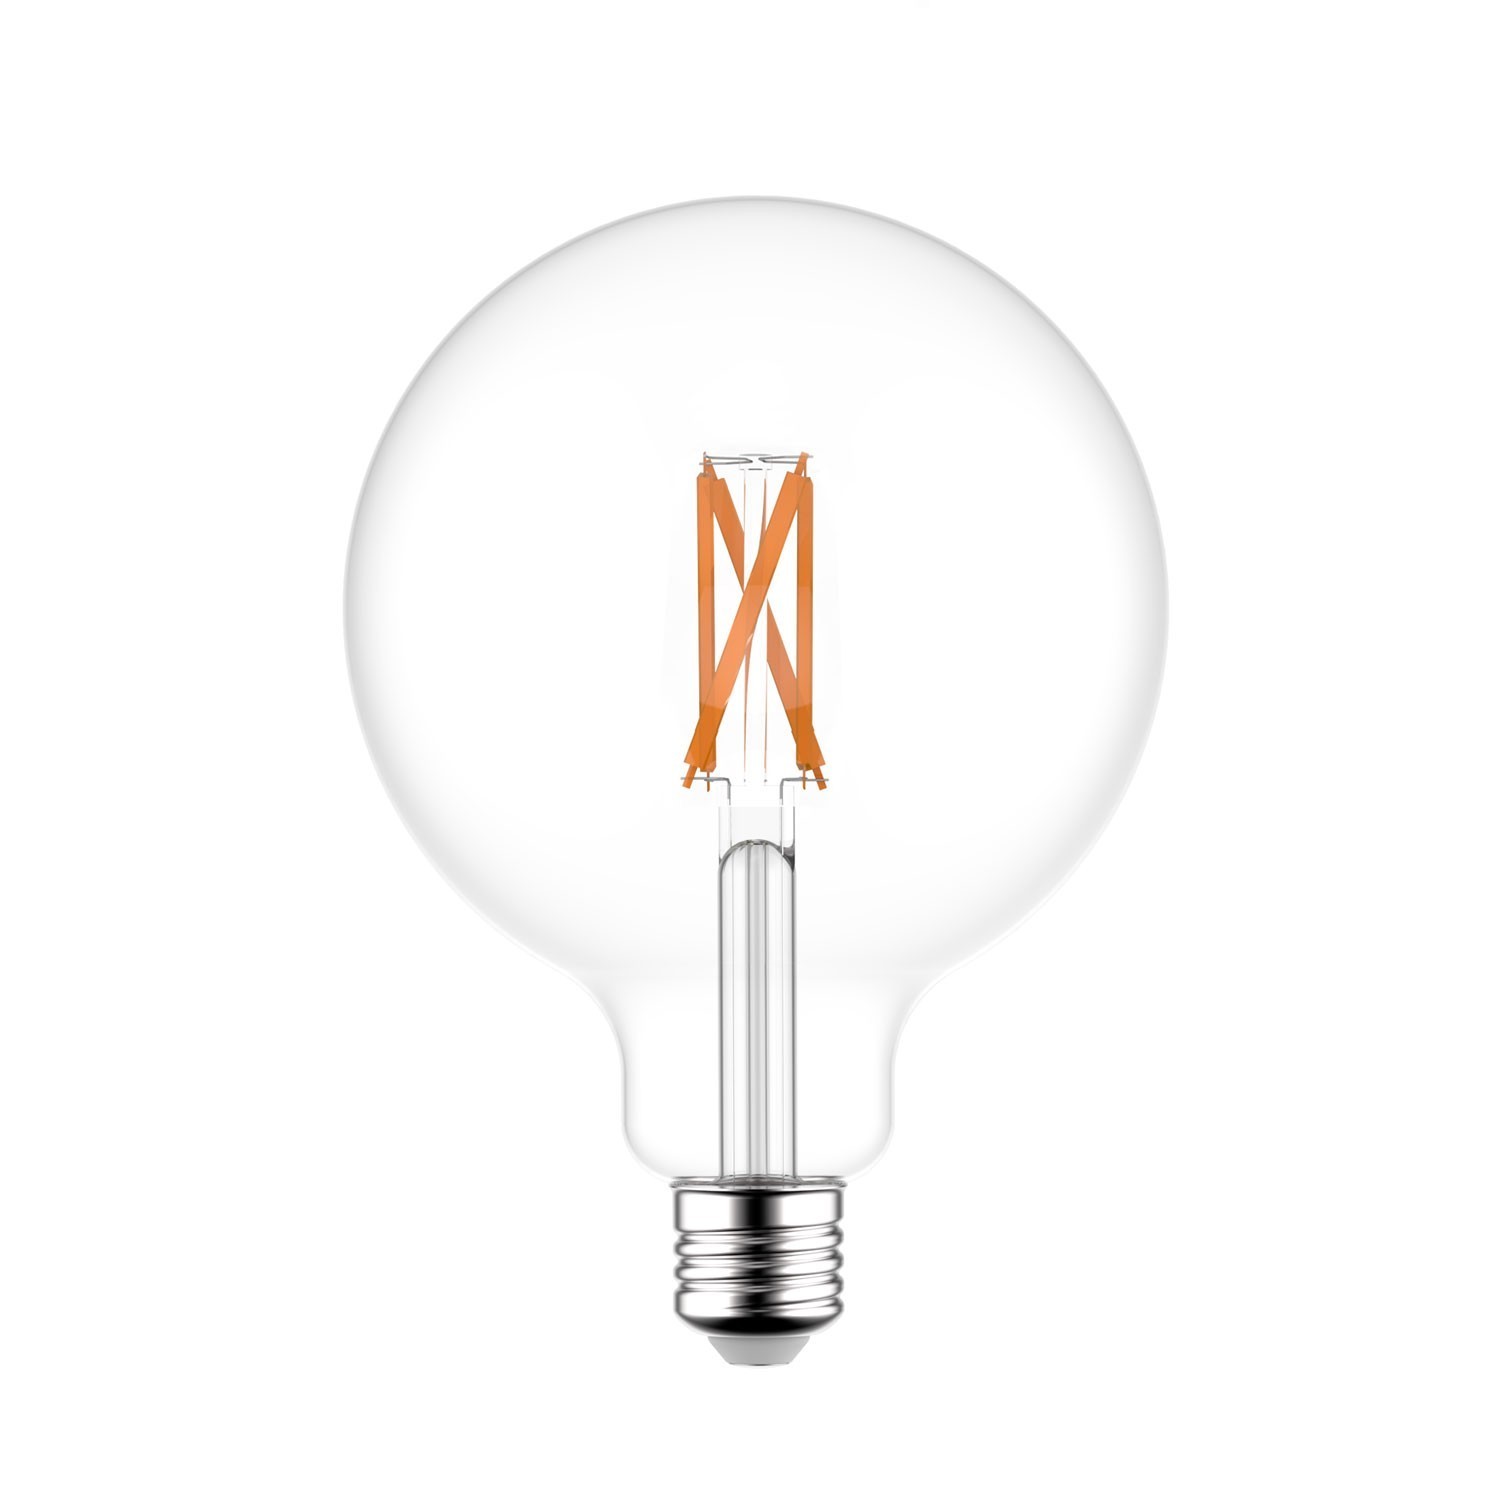 LED SMART WI-FI Light Bulb Globe G95 Transparent with Filament 6.5W 806Lm E27 Dimmable